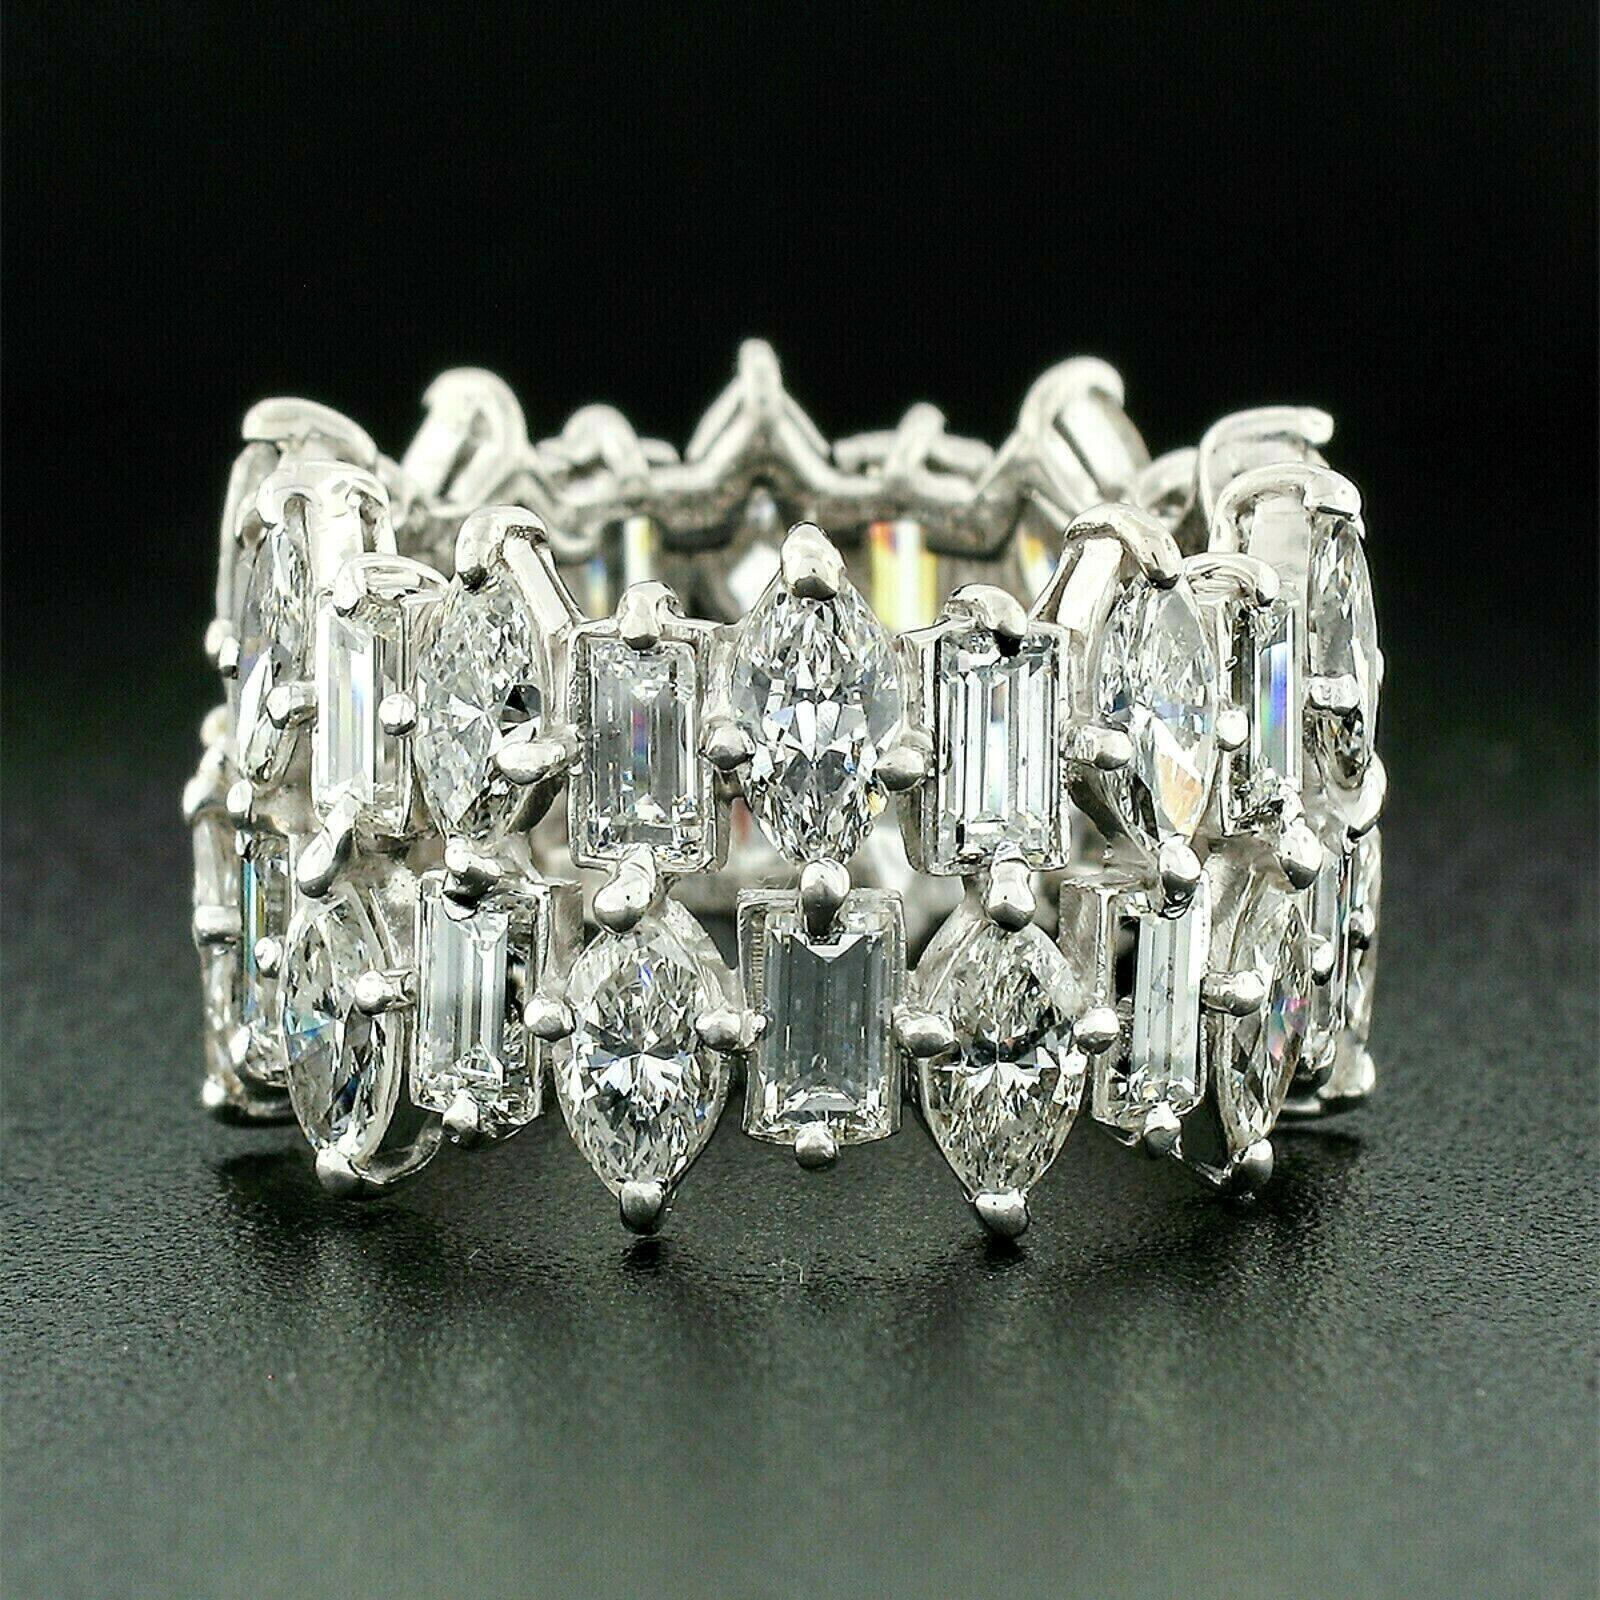 Here we have a truly spectacular vintage diamond eternity band that was crafted from solid .950 platinum. It features 40 very fine quality marquise and straight baguette cut diamonds that alternate in two rows throughout the eternity design. The